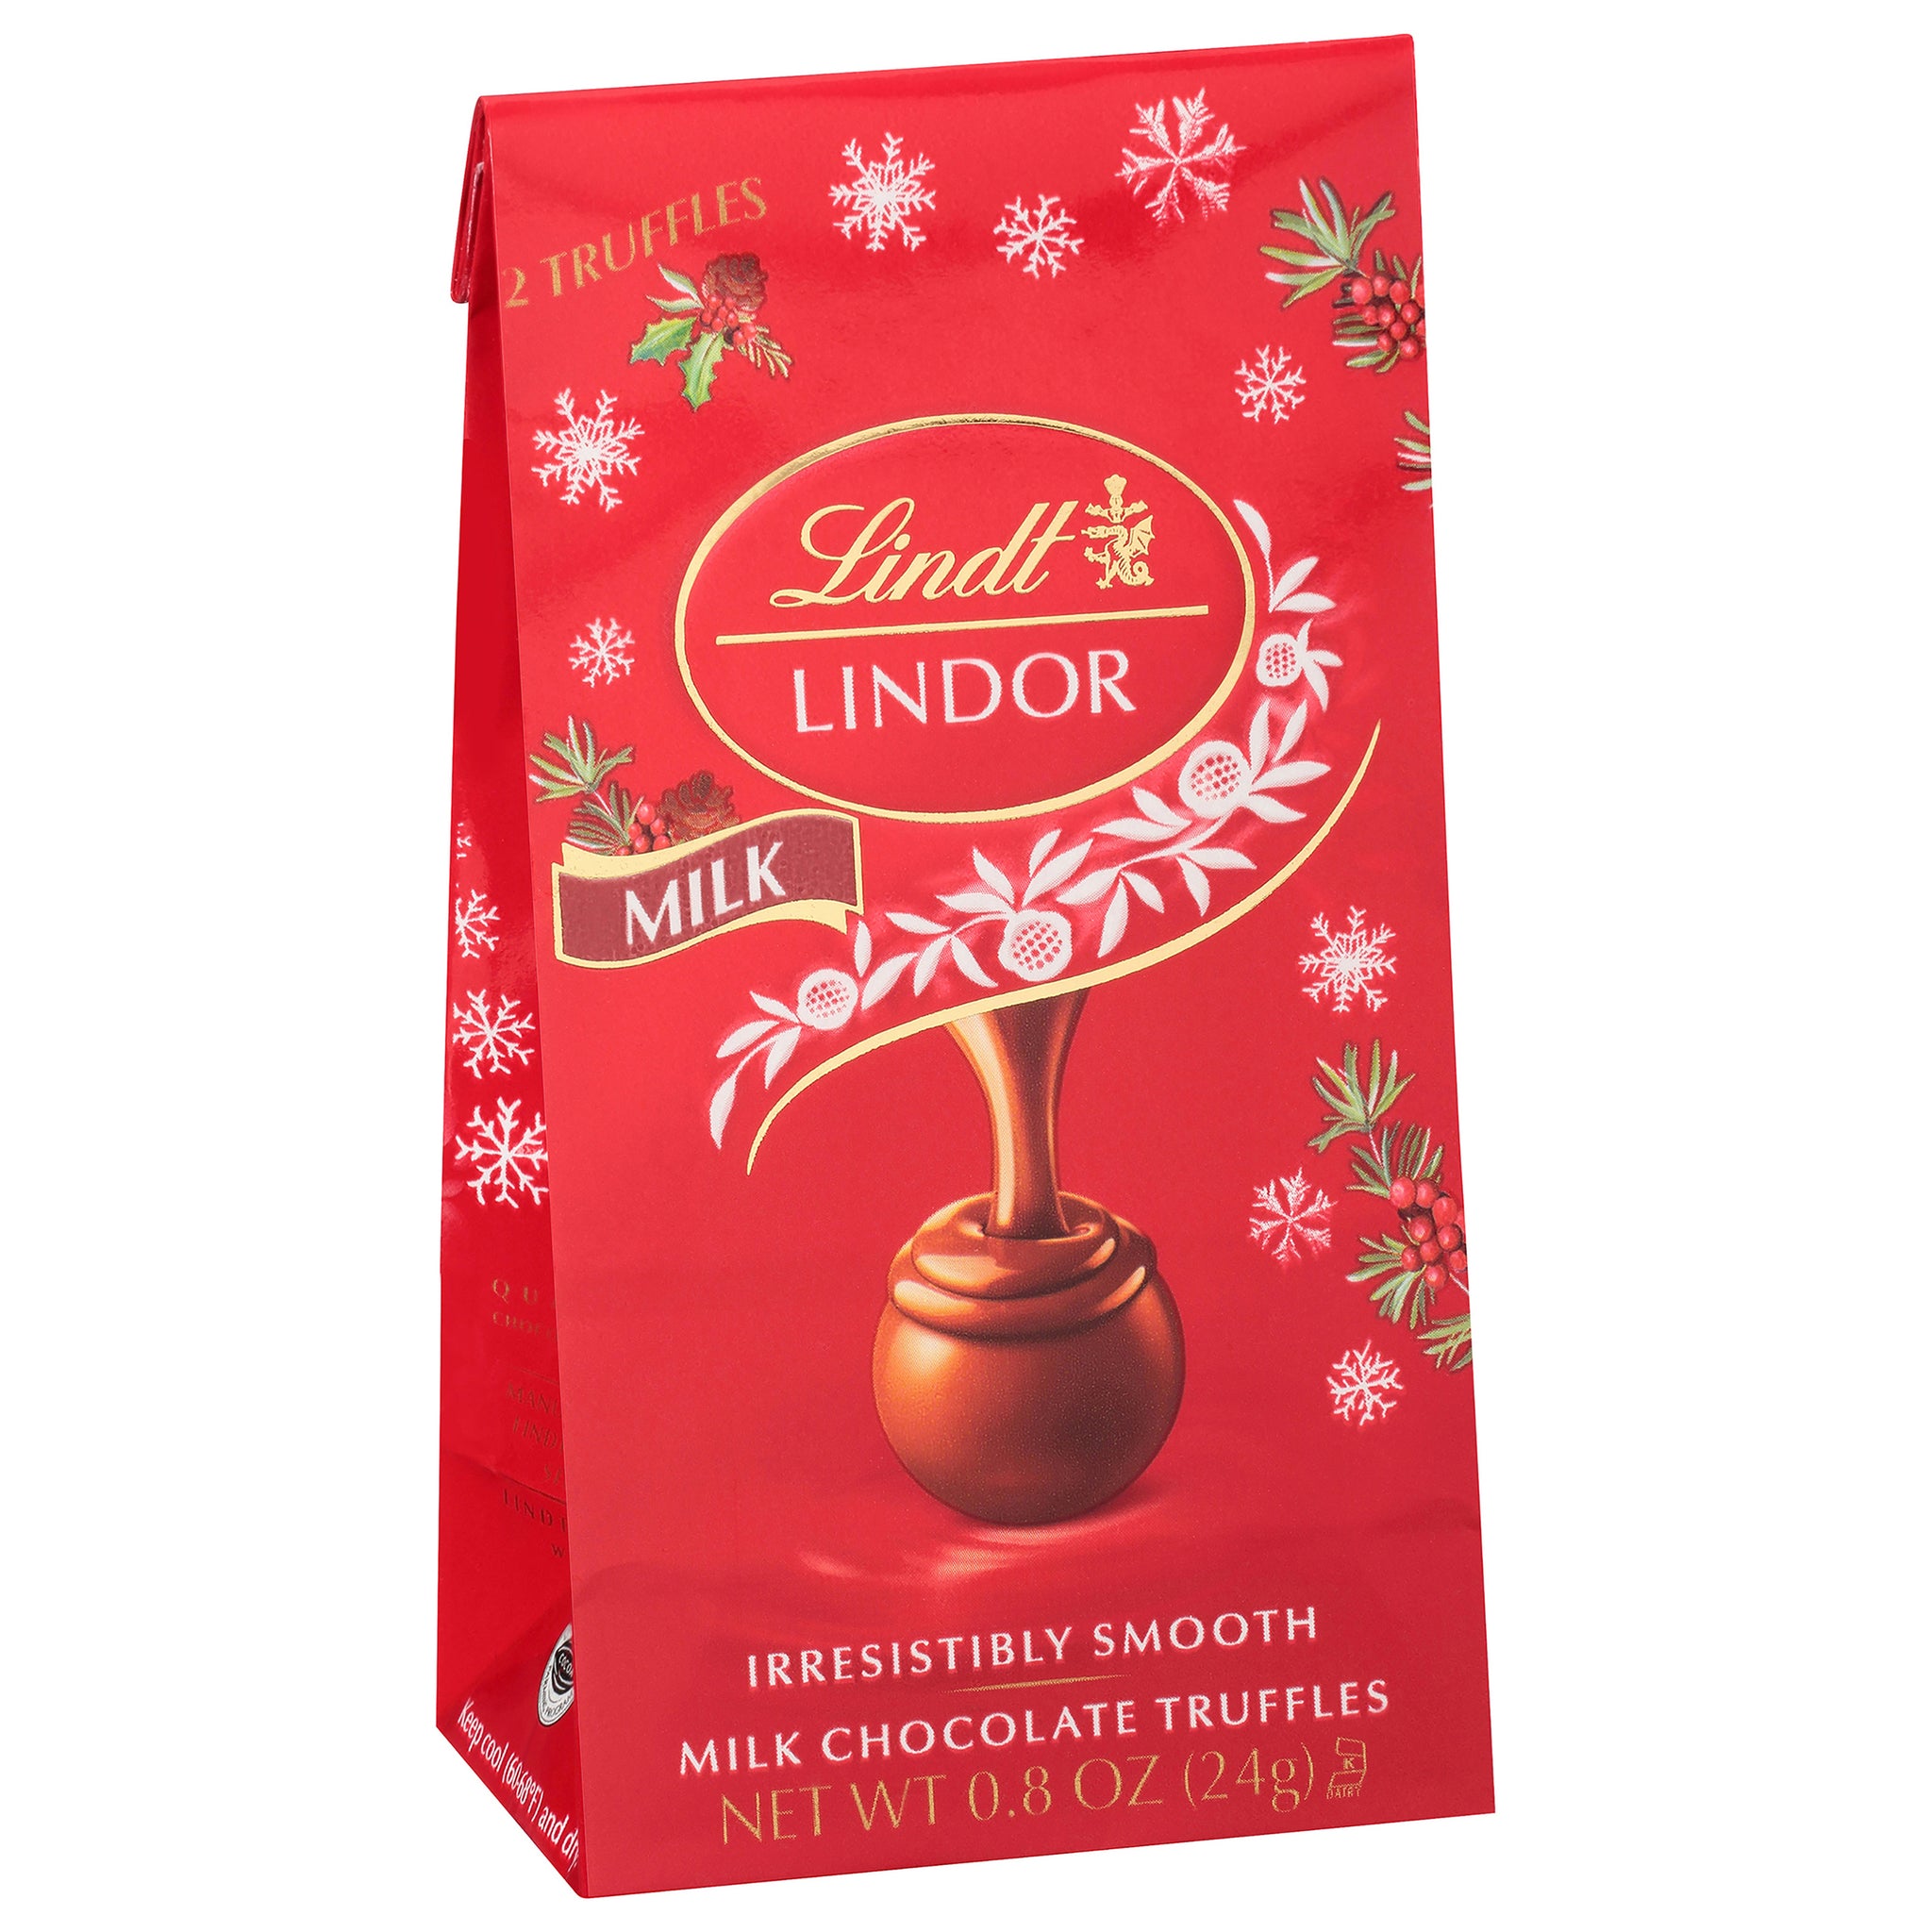 Lindt - Lindt added a new photo.